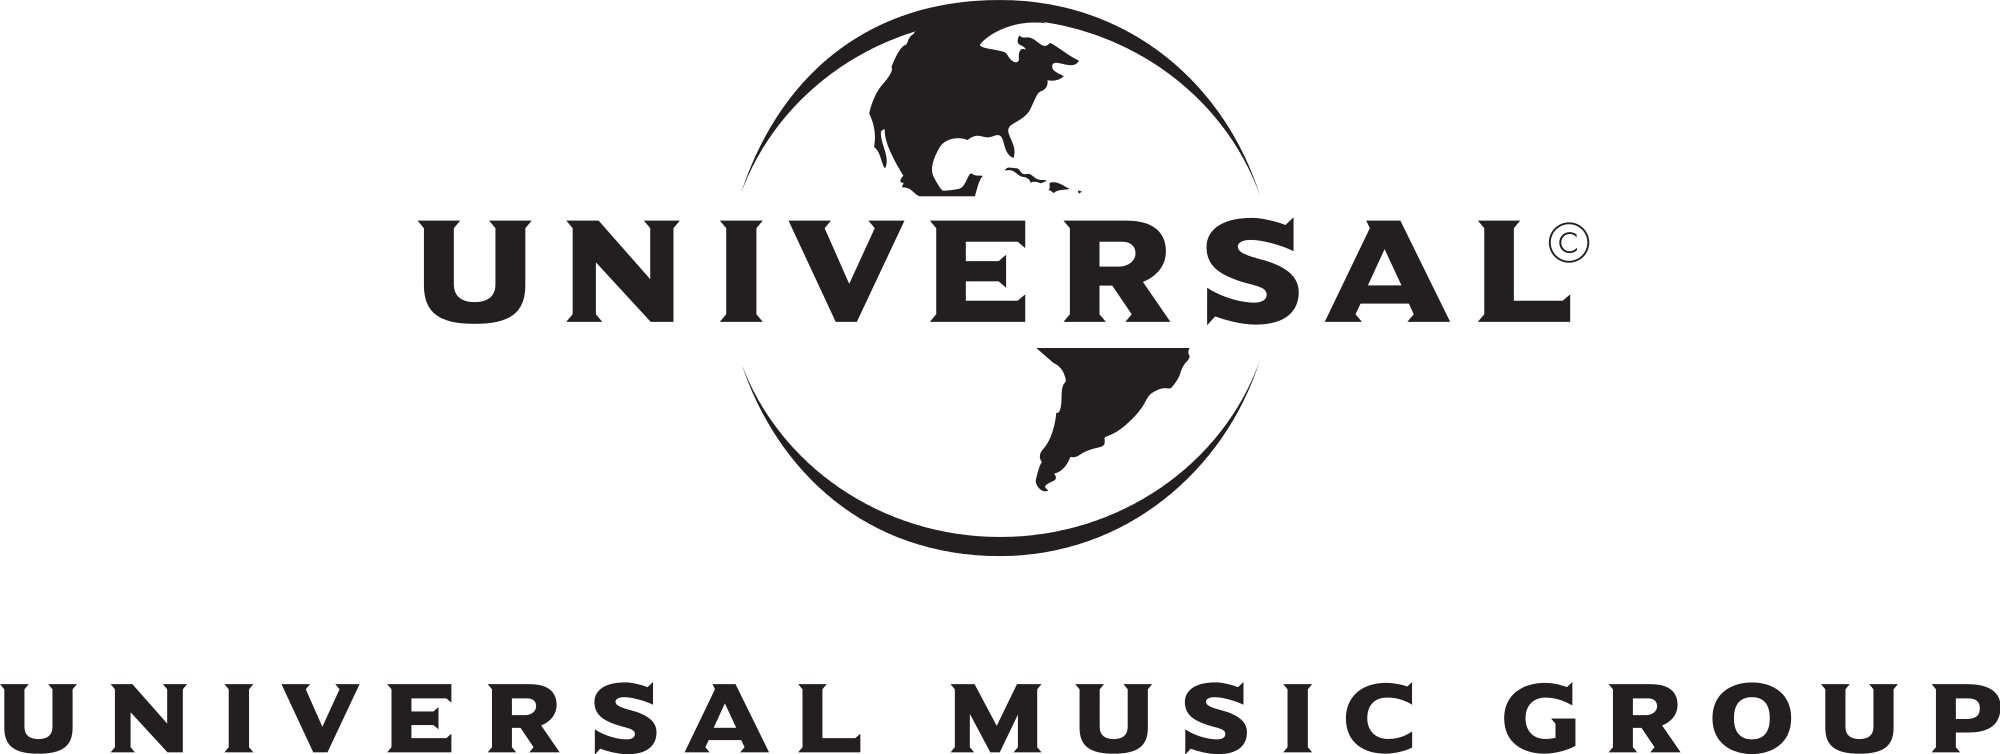 Universal Music Group, the world's leading music company | Home Page - UMG